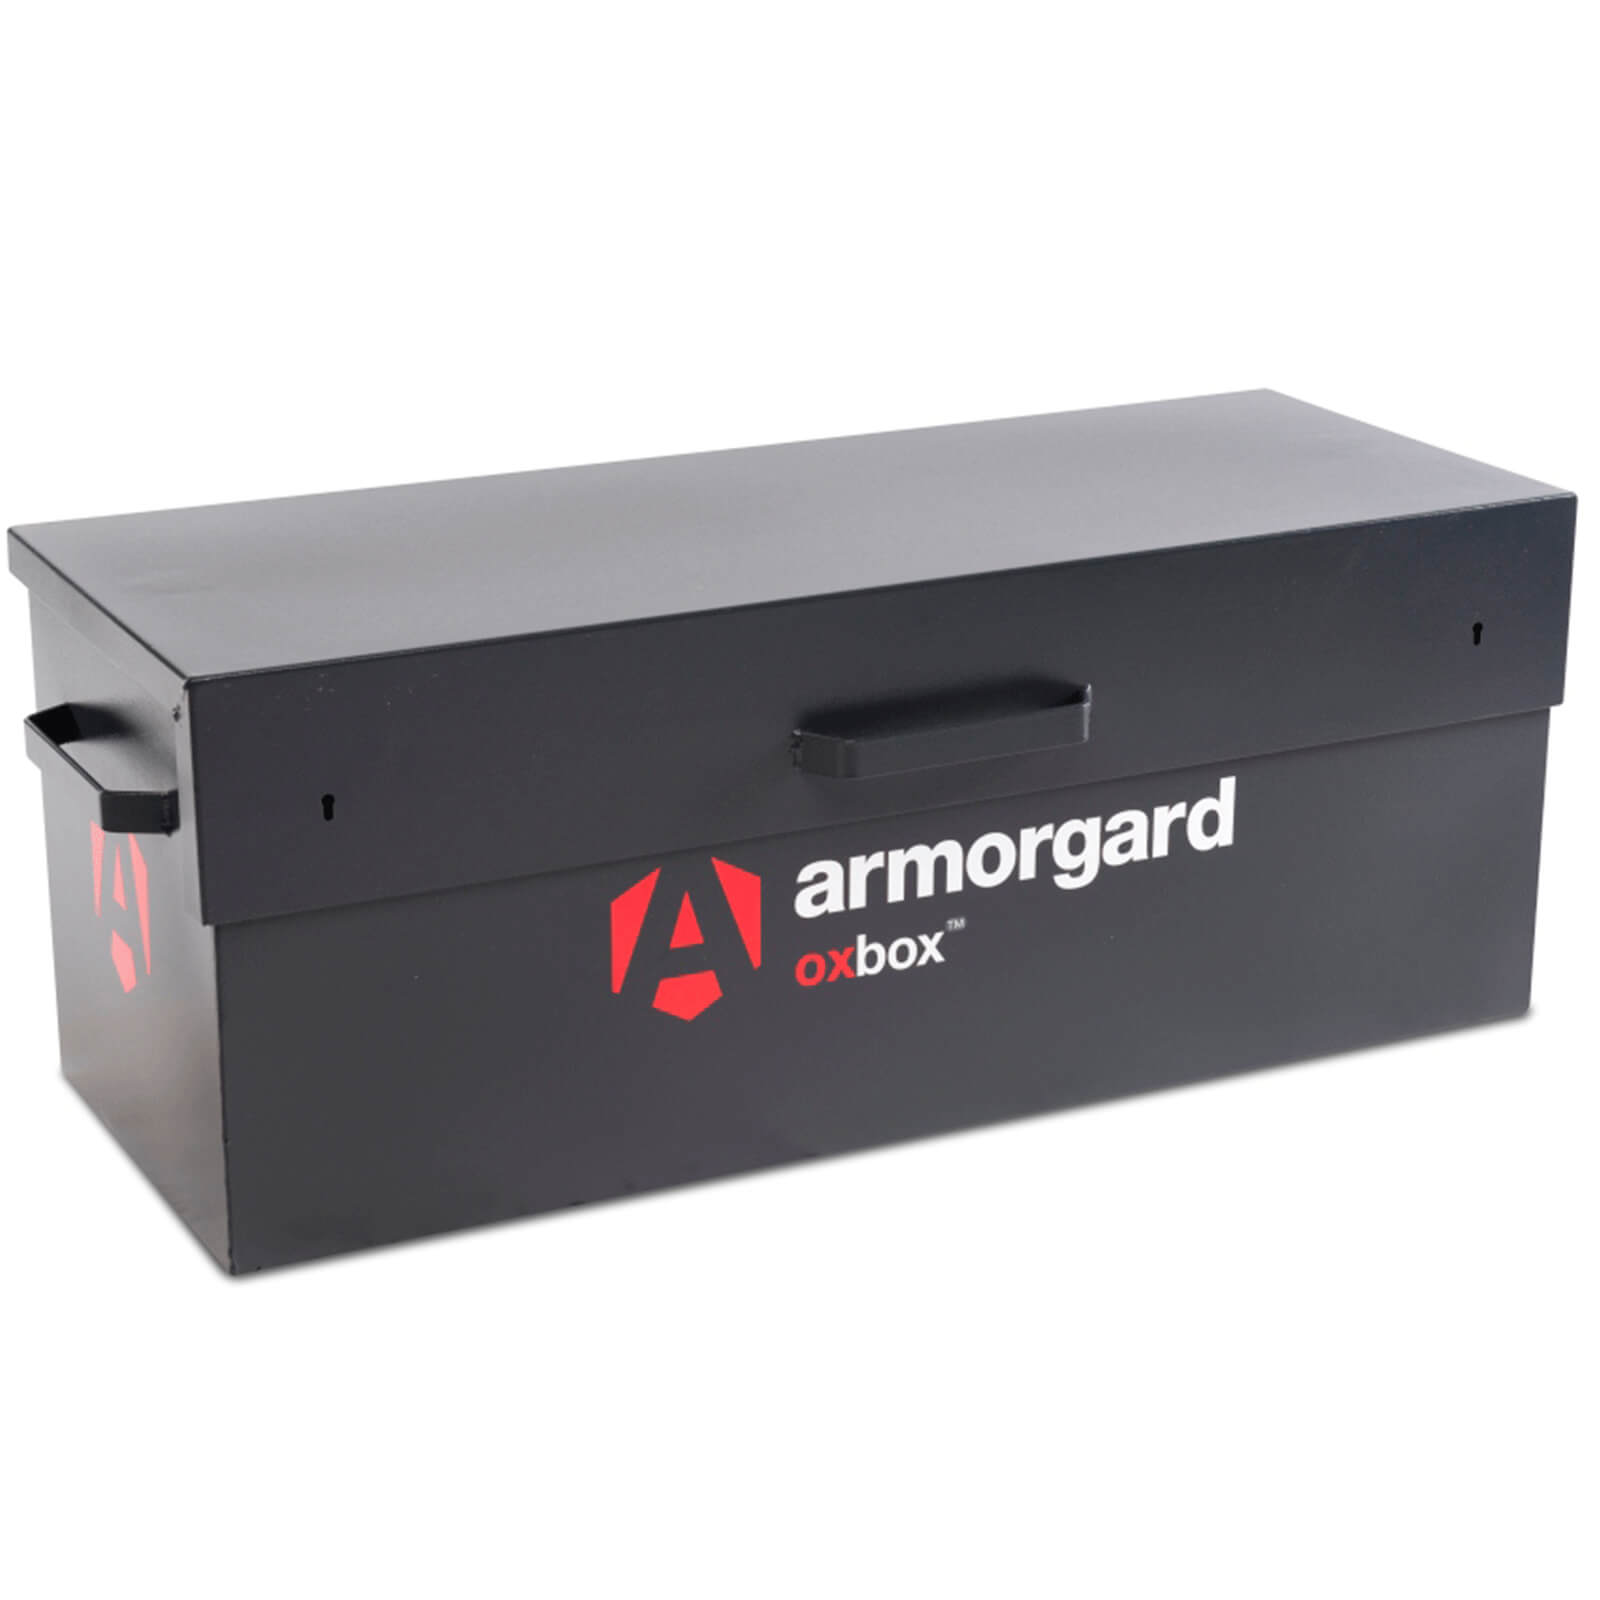 Image of Armorgard Oxbox Secure Truck Storage Box 1215mm 490mm 450mm